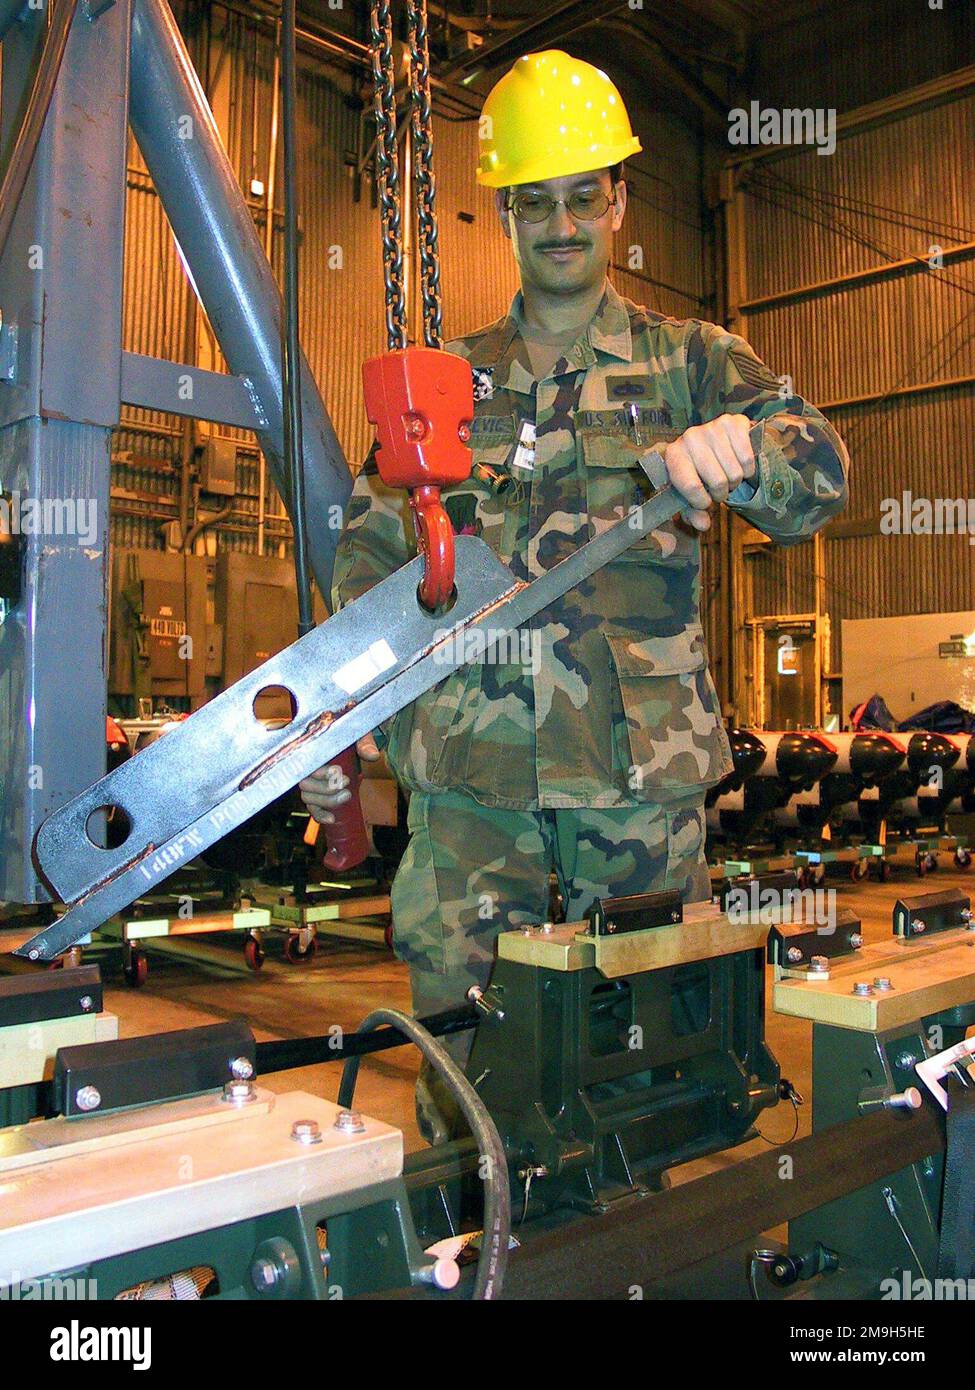 011211-F-4006S-006. Subject Operation/Series: NOBLE EAGLE 2001 Base: Duluth State: Minnesota (MN) Country: United States Of America (USA) Scene Major Command Shown: ANG Stock Photo